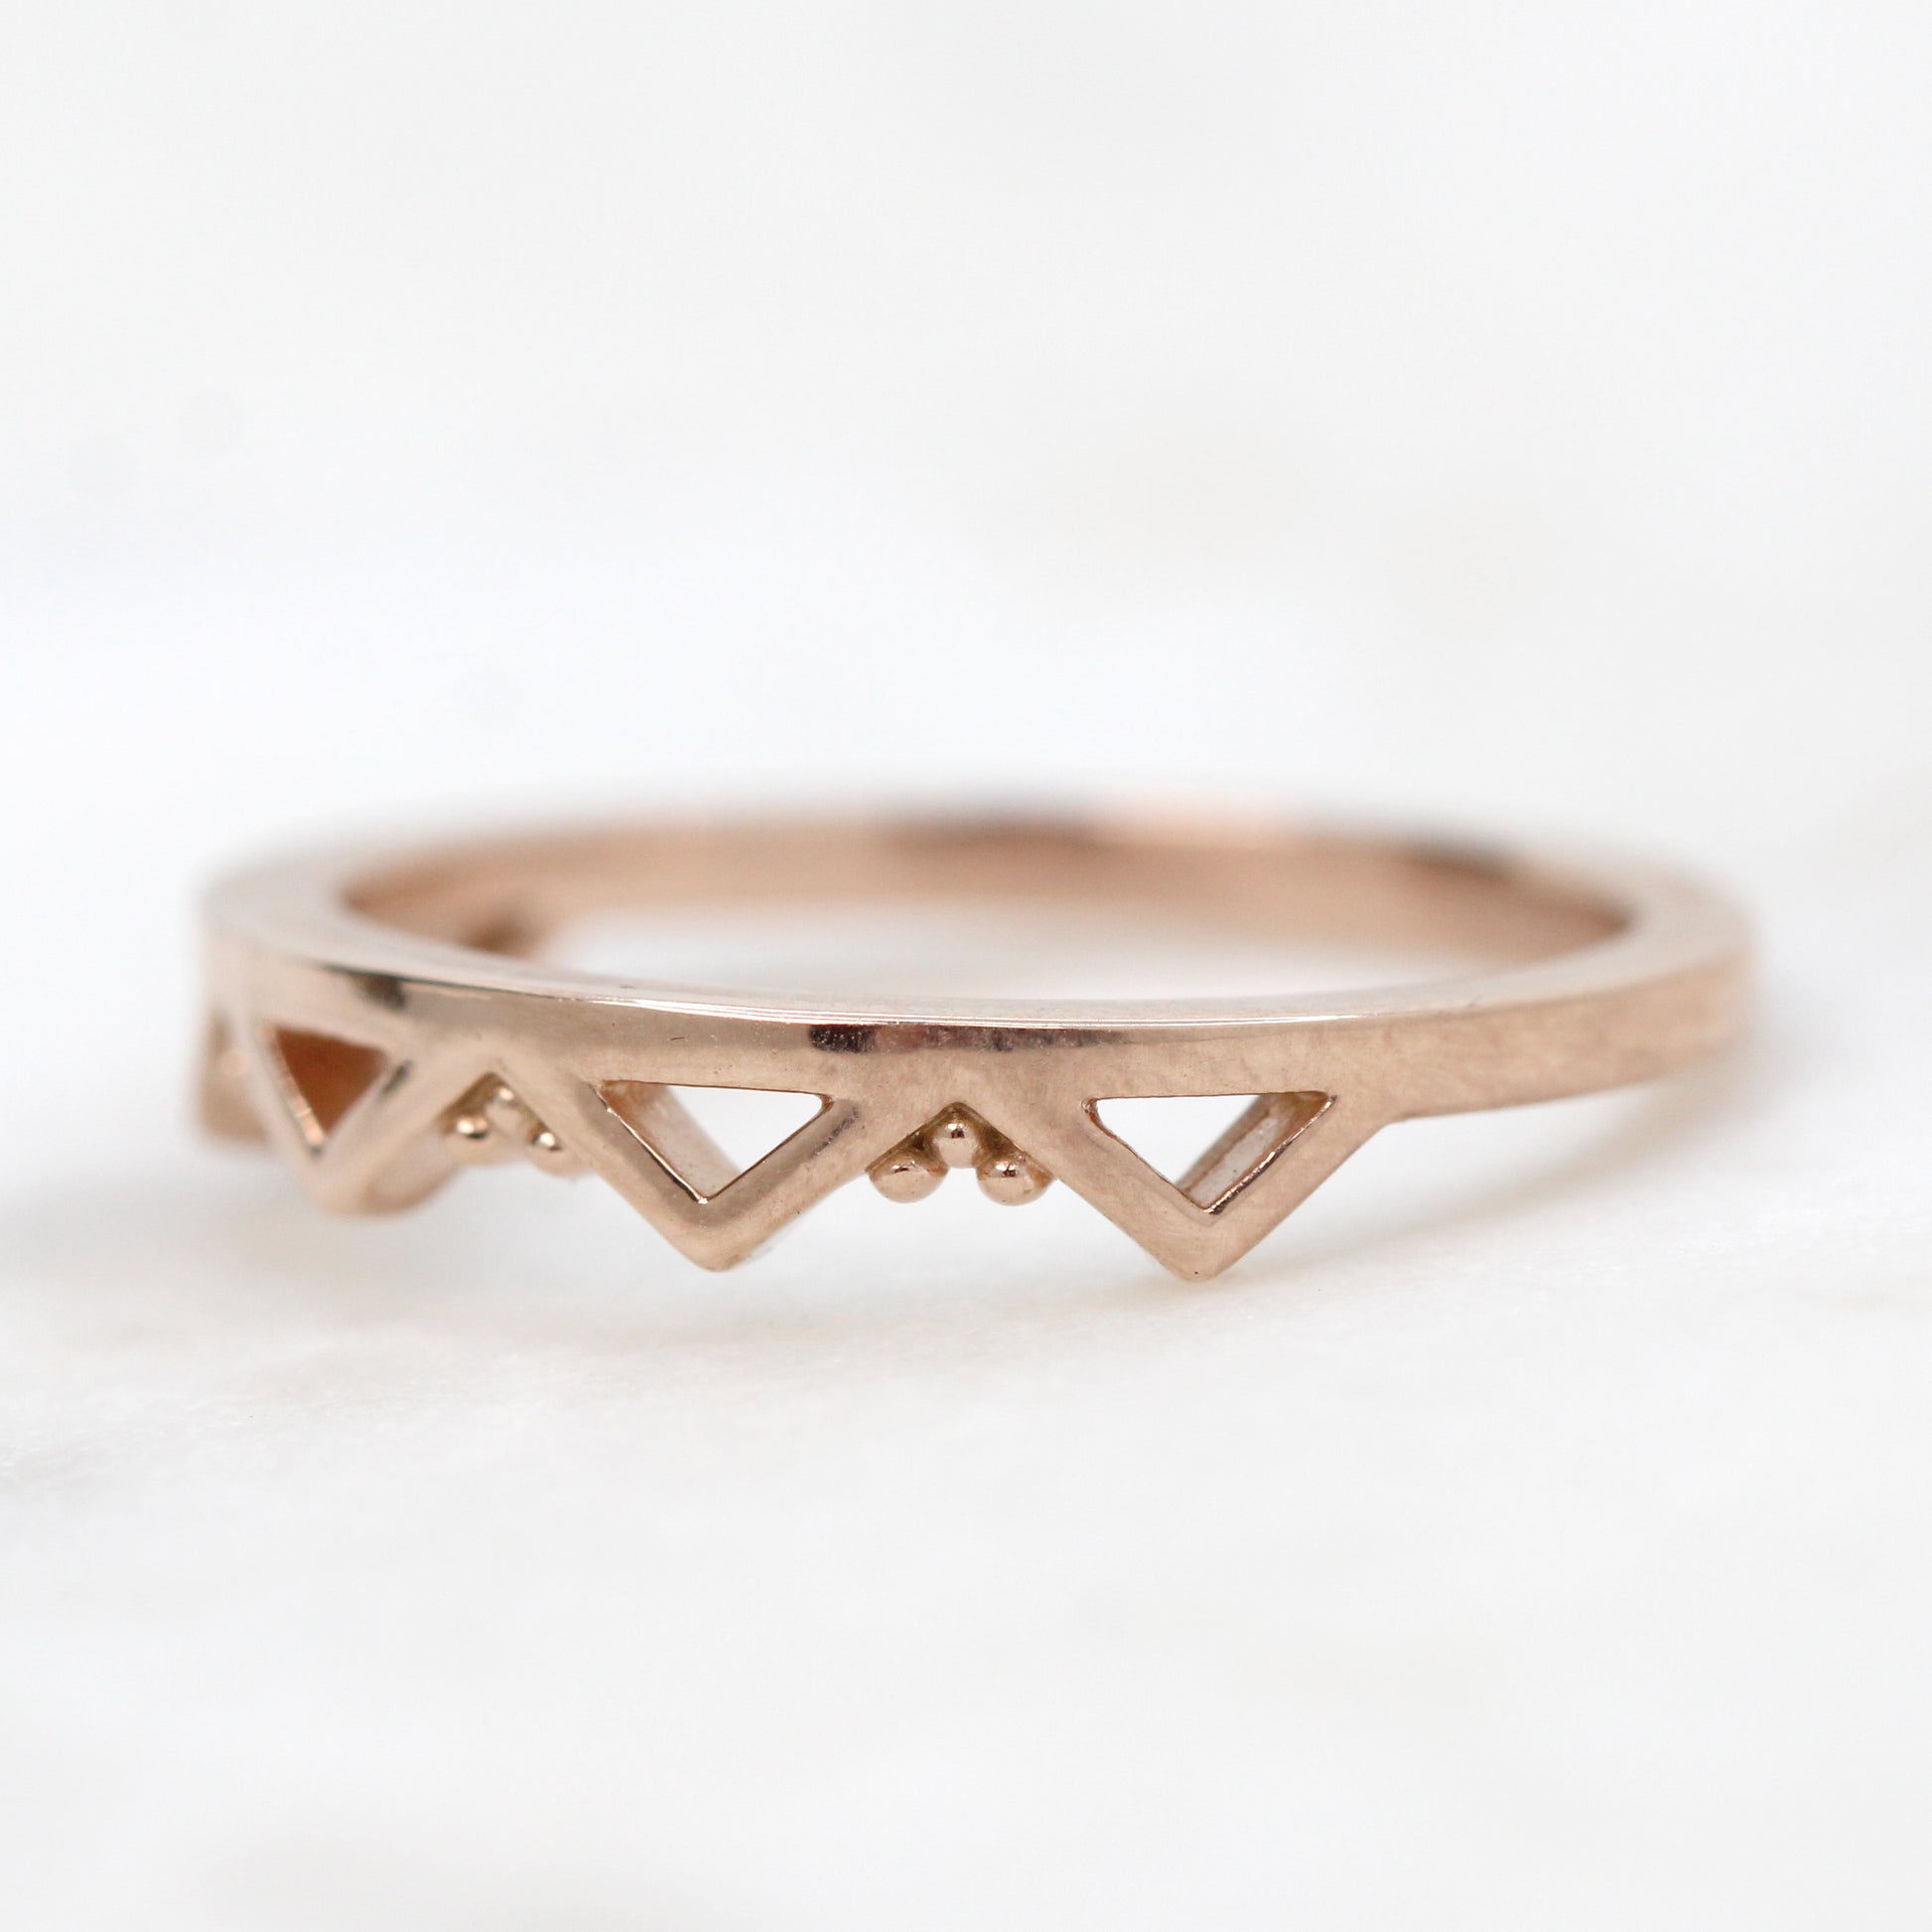 Samantha-  (M) Alpine Wedding Band - Stackable Wedding Band - Made to Order, Choose Your Gold Tone - Midwinter Co. Alternative Bridal Rings and Modern Fine Jewelry